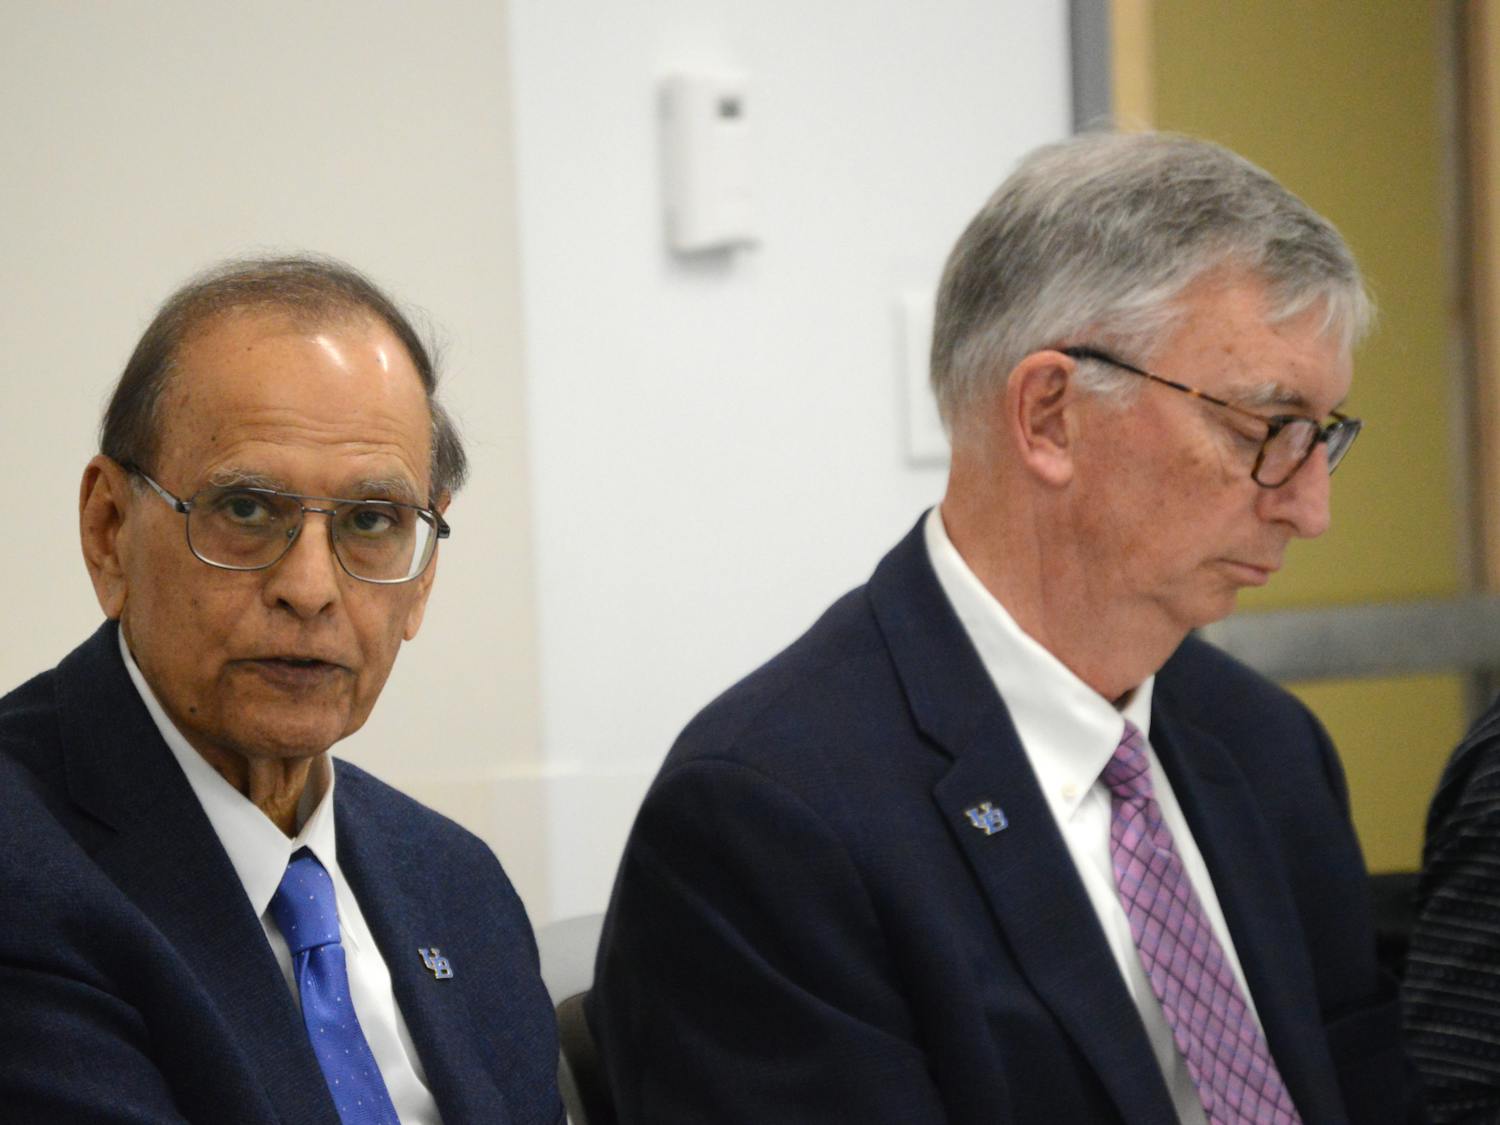 President Satish Tripathi and Provost A. Scott Weber were present at the meeting, and Tripathi read a statement emphasizing "the safety and security" of the university.&nbsp;